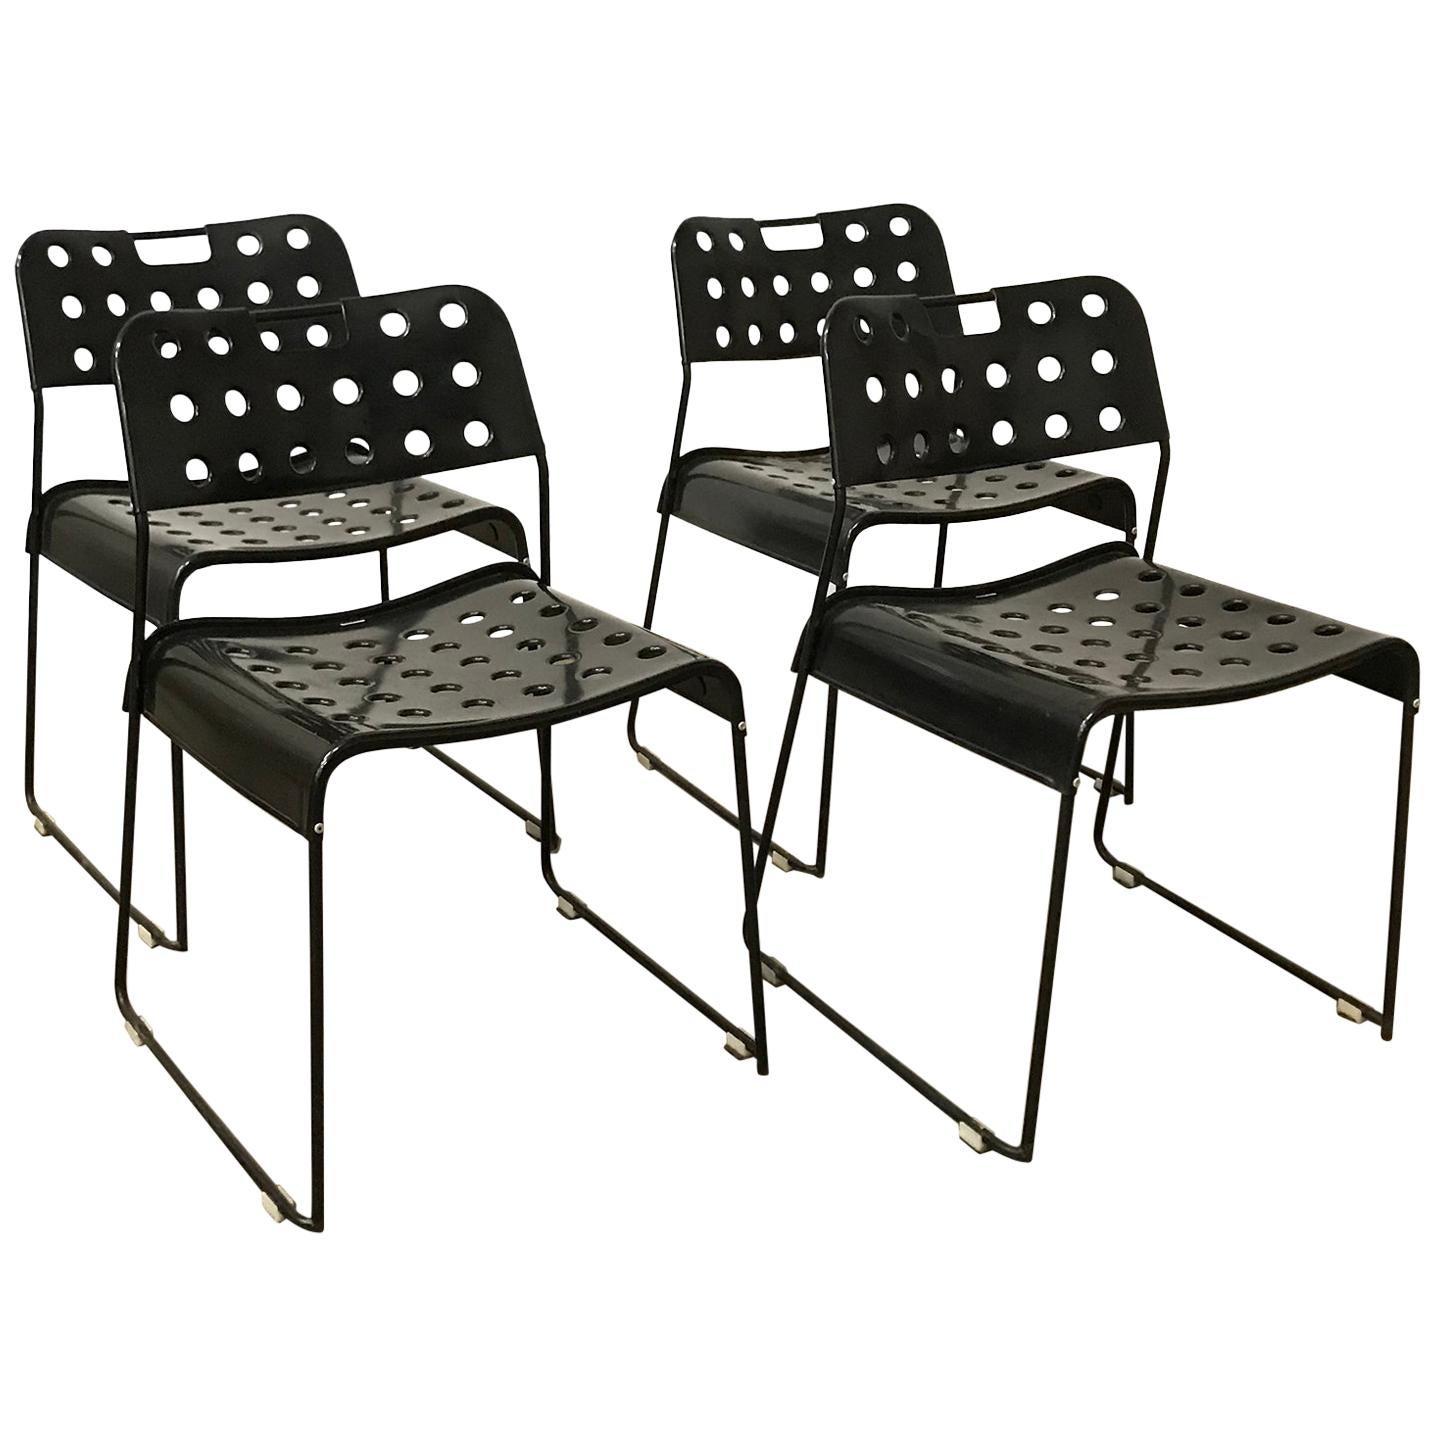 1971, Rodney Kinsman, Set of Rare All Black, Incl. Frame, Omstak Stacking Chairs